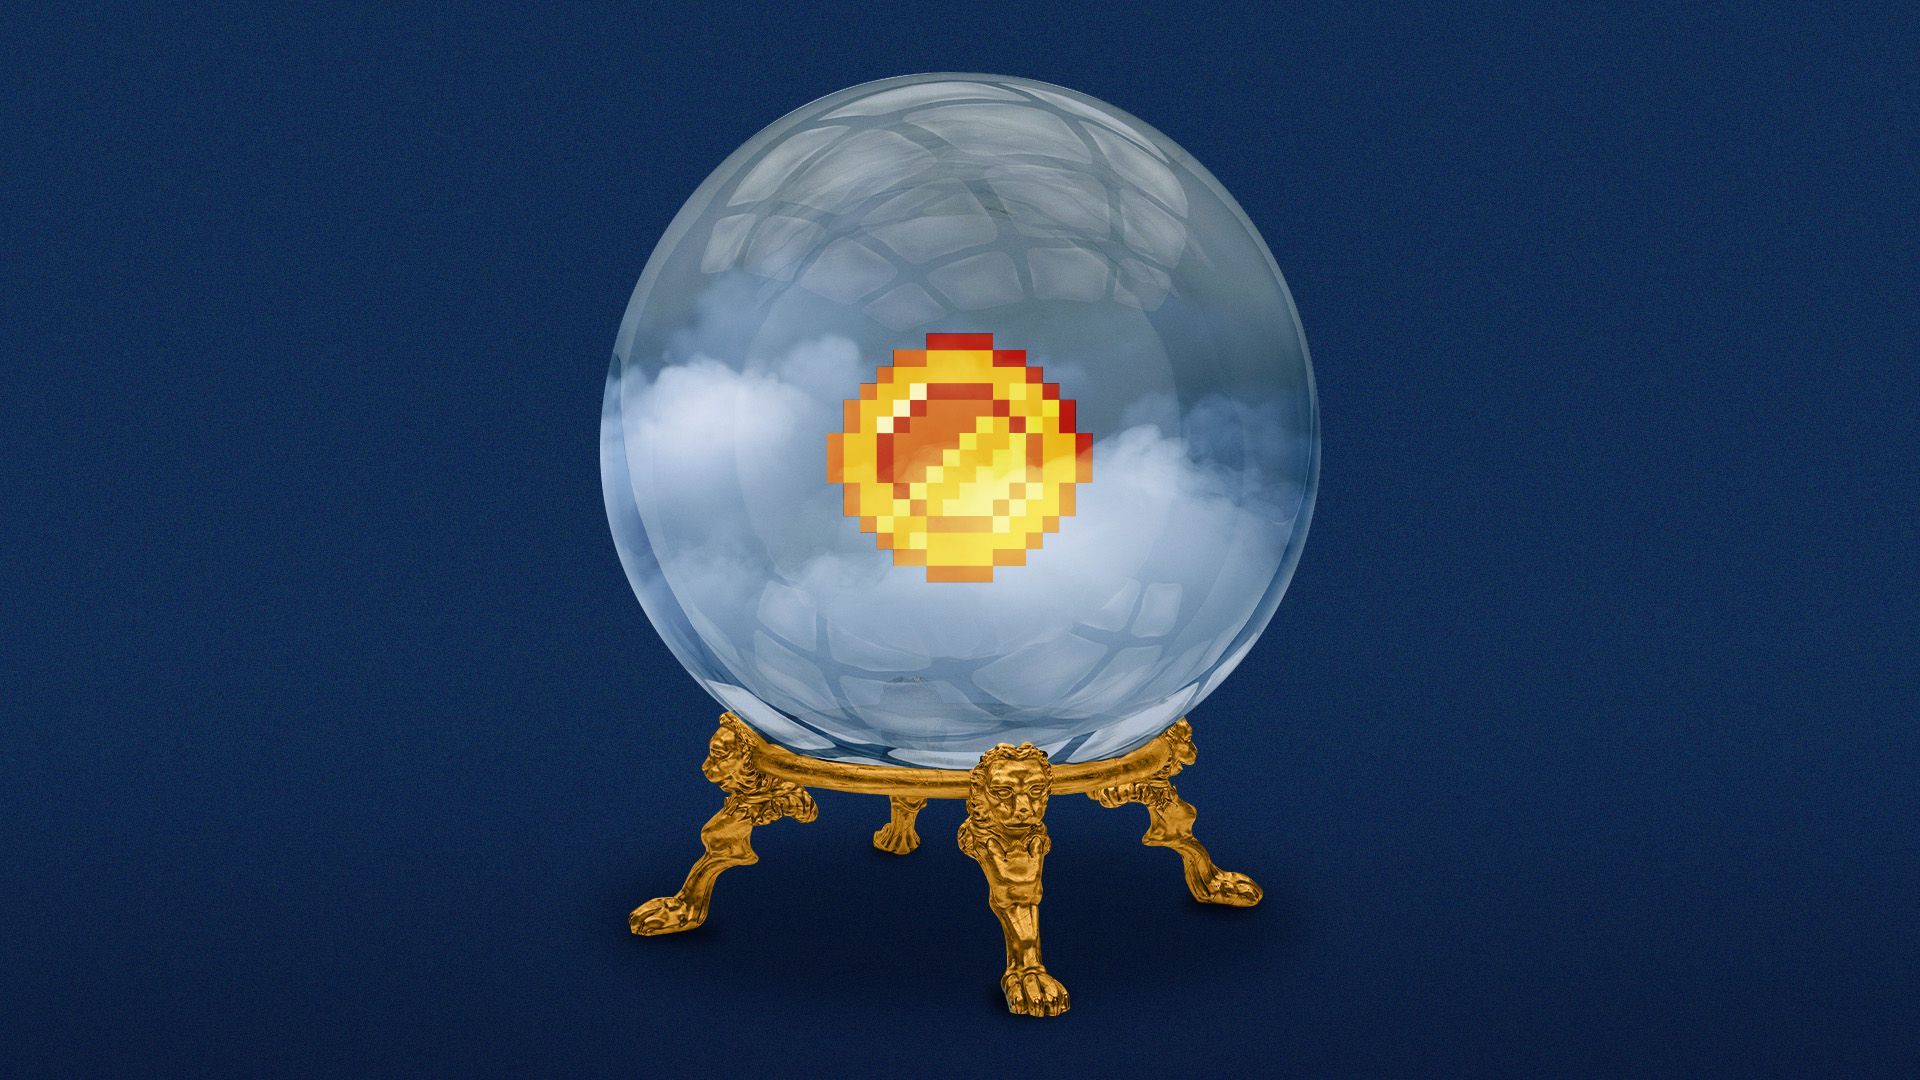 Illustration of a crystal ball with a pixelated coin inside.